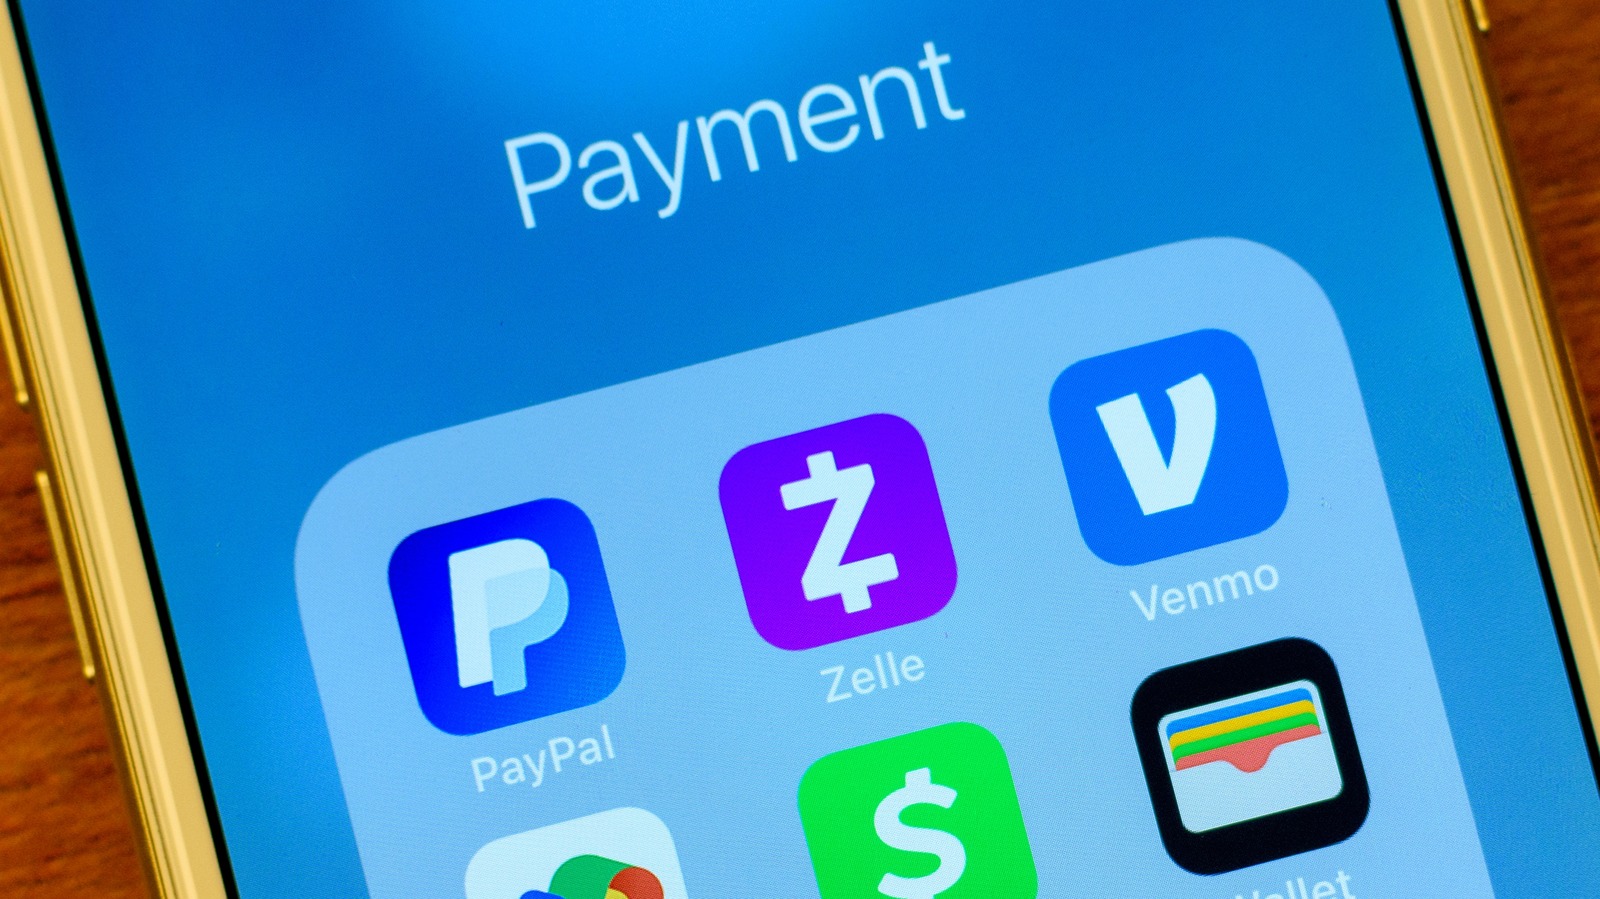 Zelle Vs Venmo: Which Is The Better Payment App?